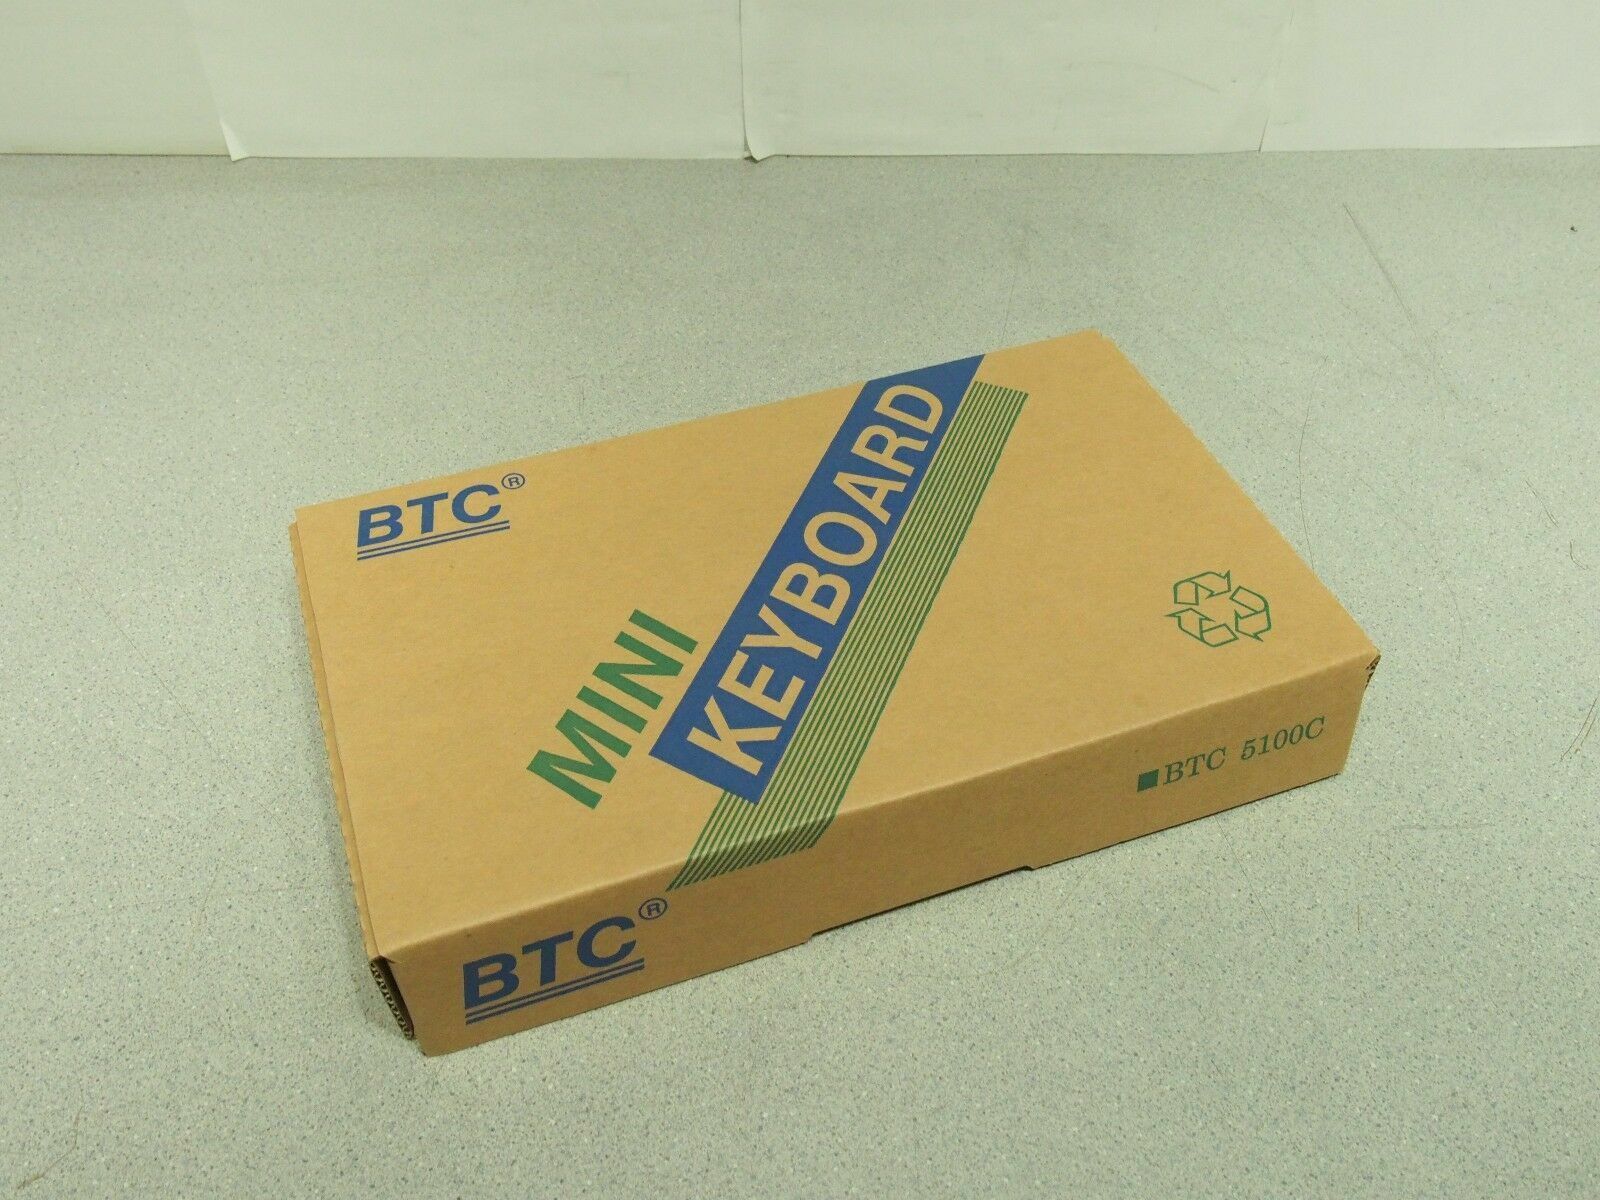 New In Box BTC 5100C DIN 5 Pin Mini Compact Keyboard AT Din5 Connector